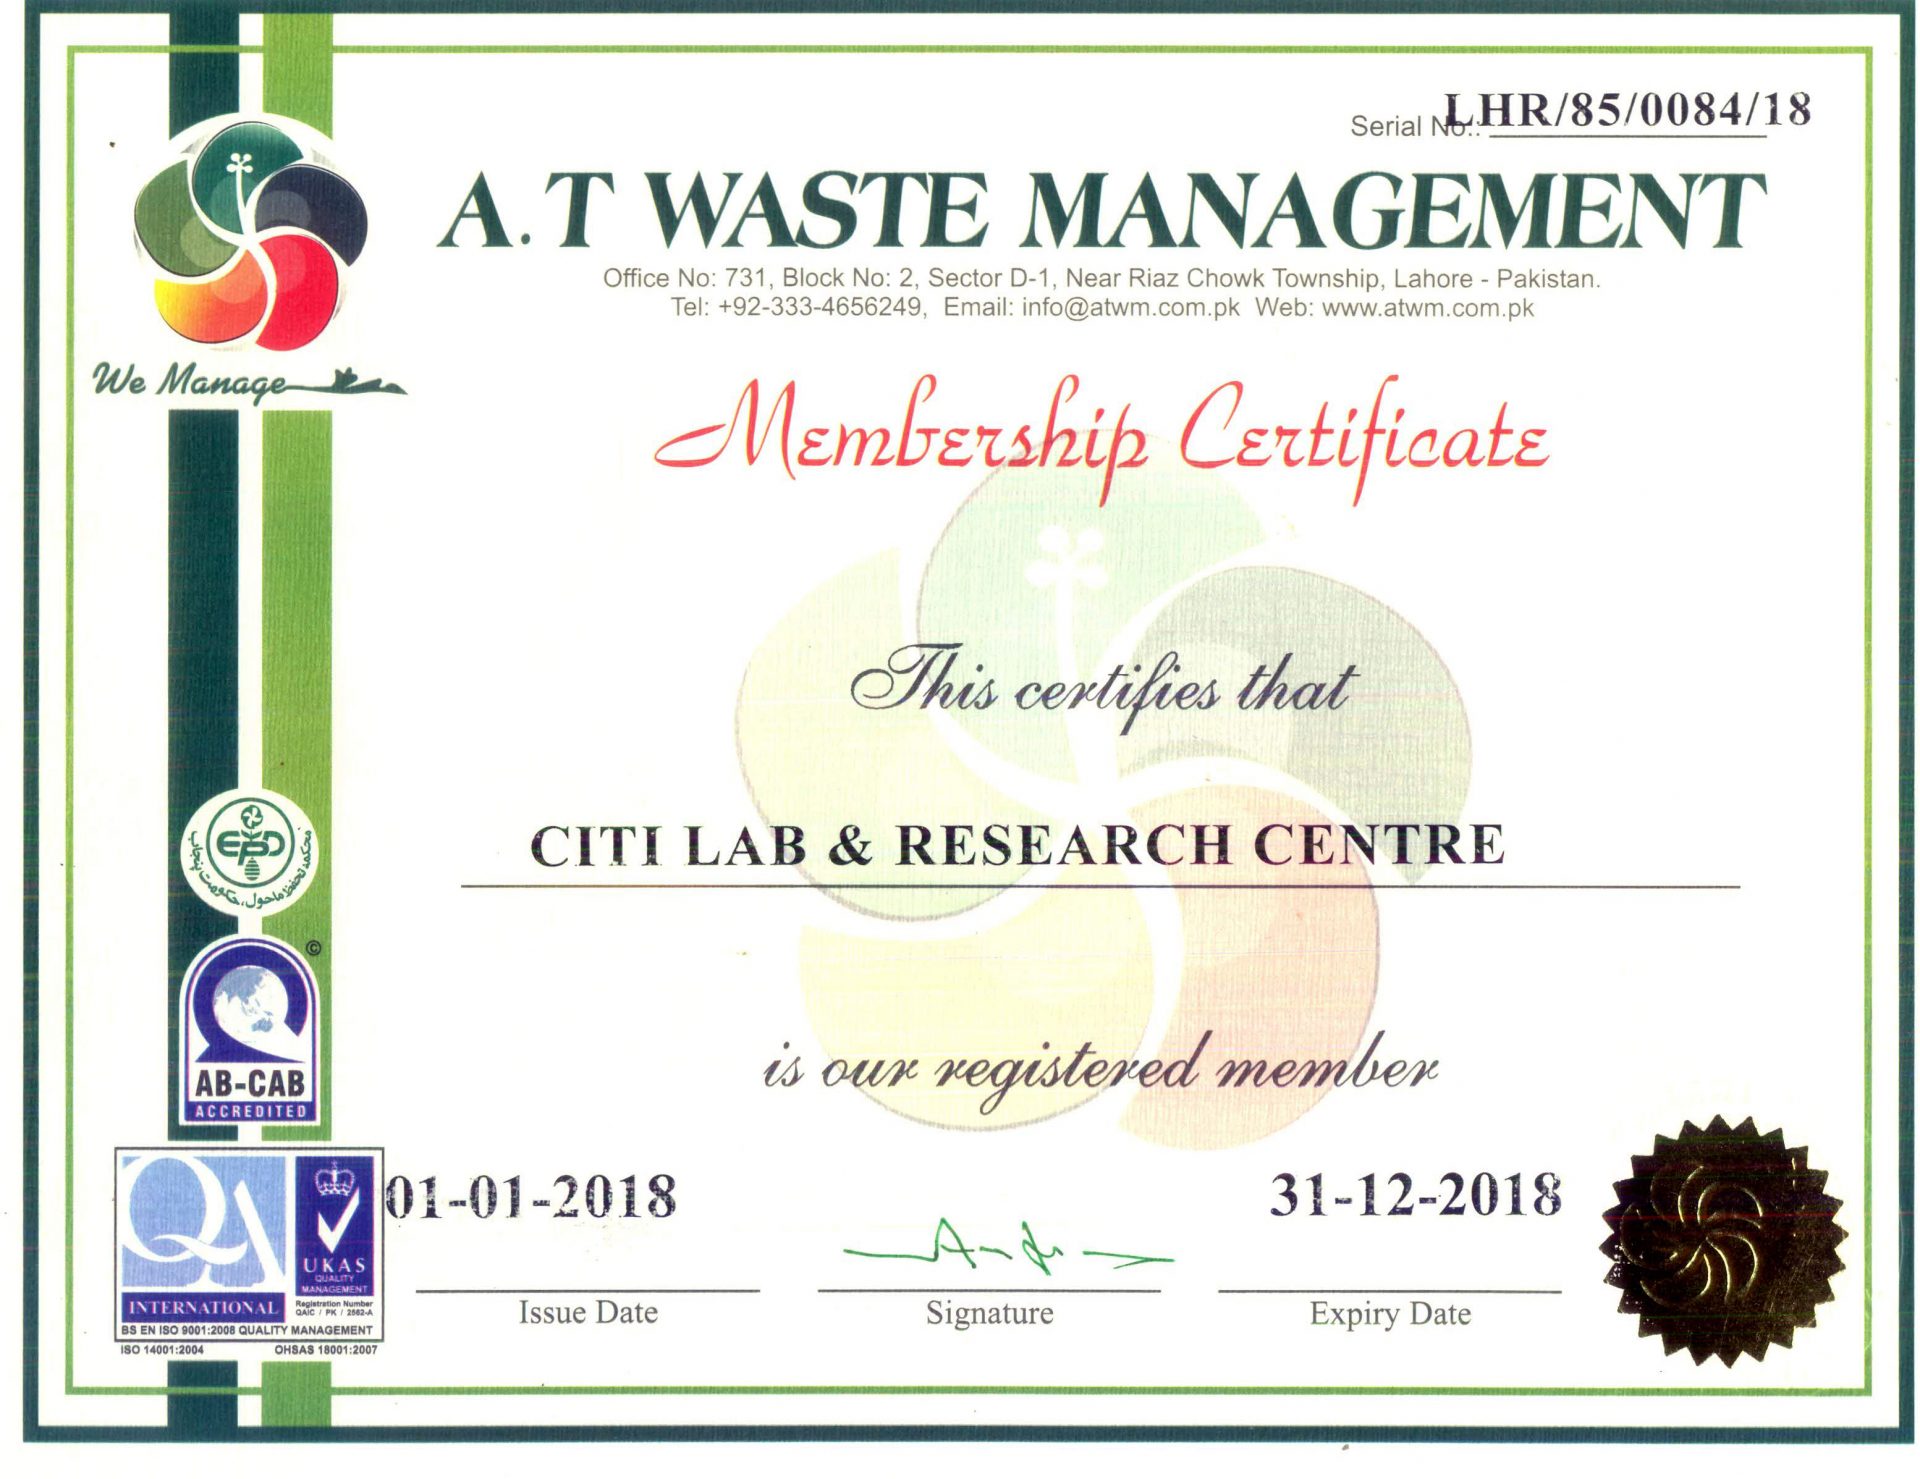 Citi Lab A.T Waste Management Certificate